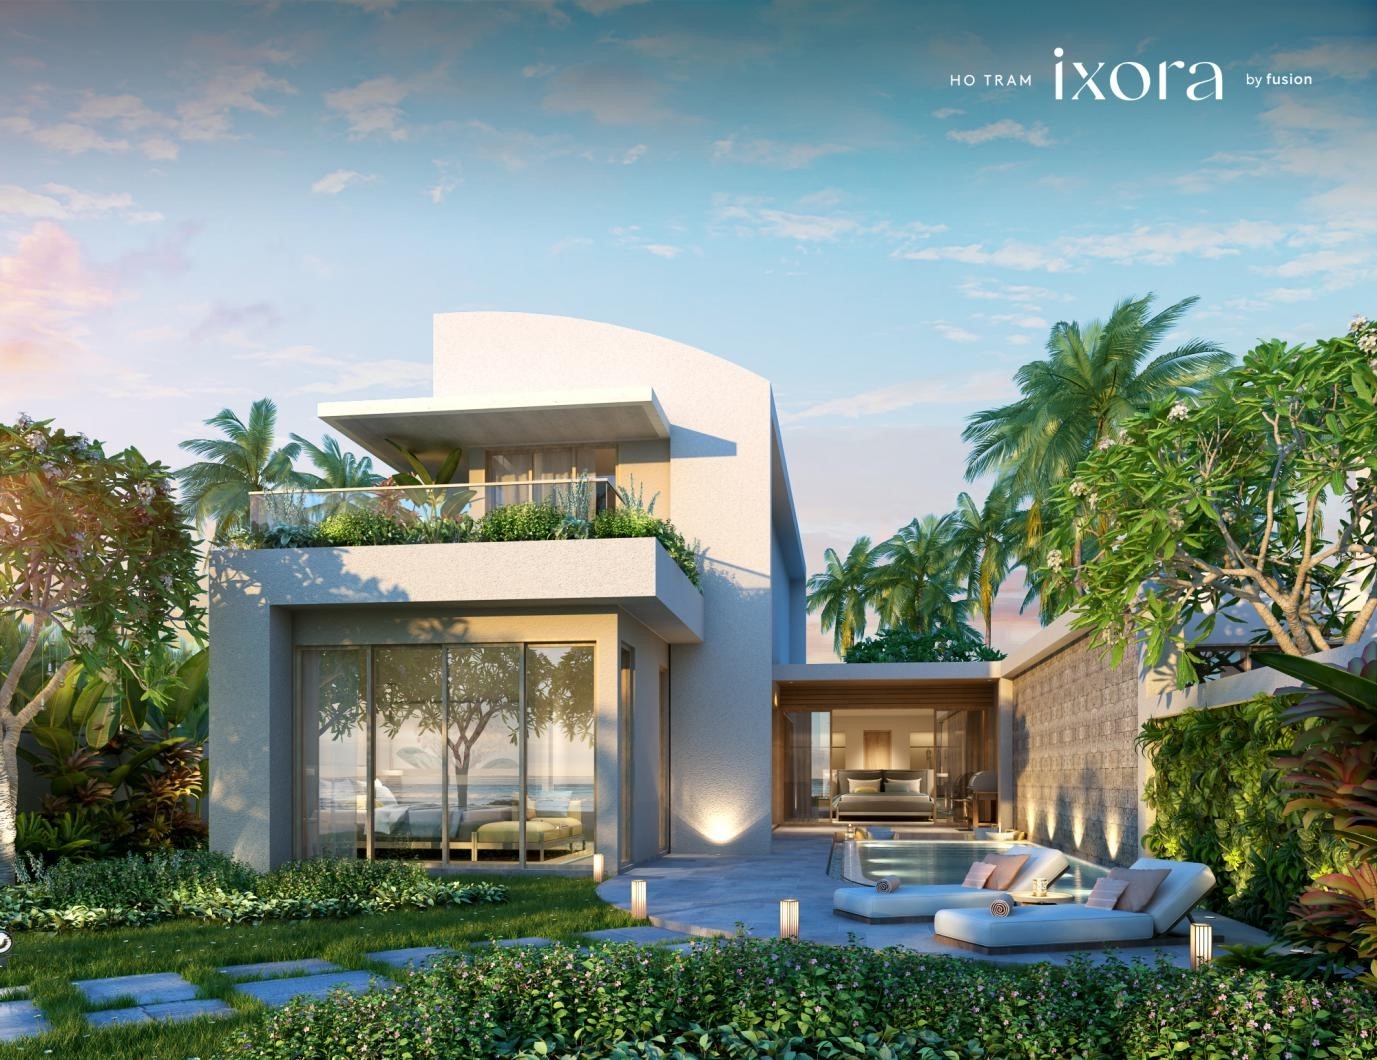 ixora ho tram by fusion unveils exclusive villa collection on the beach